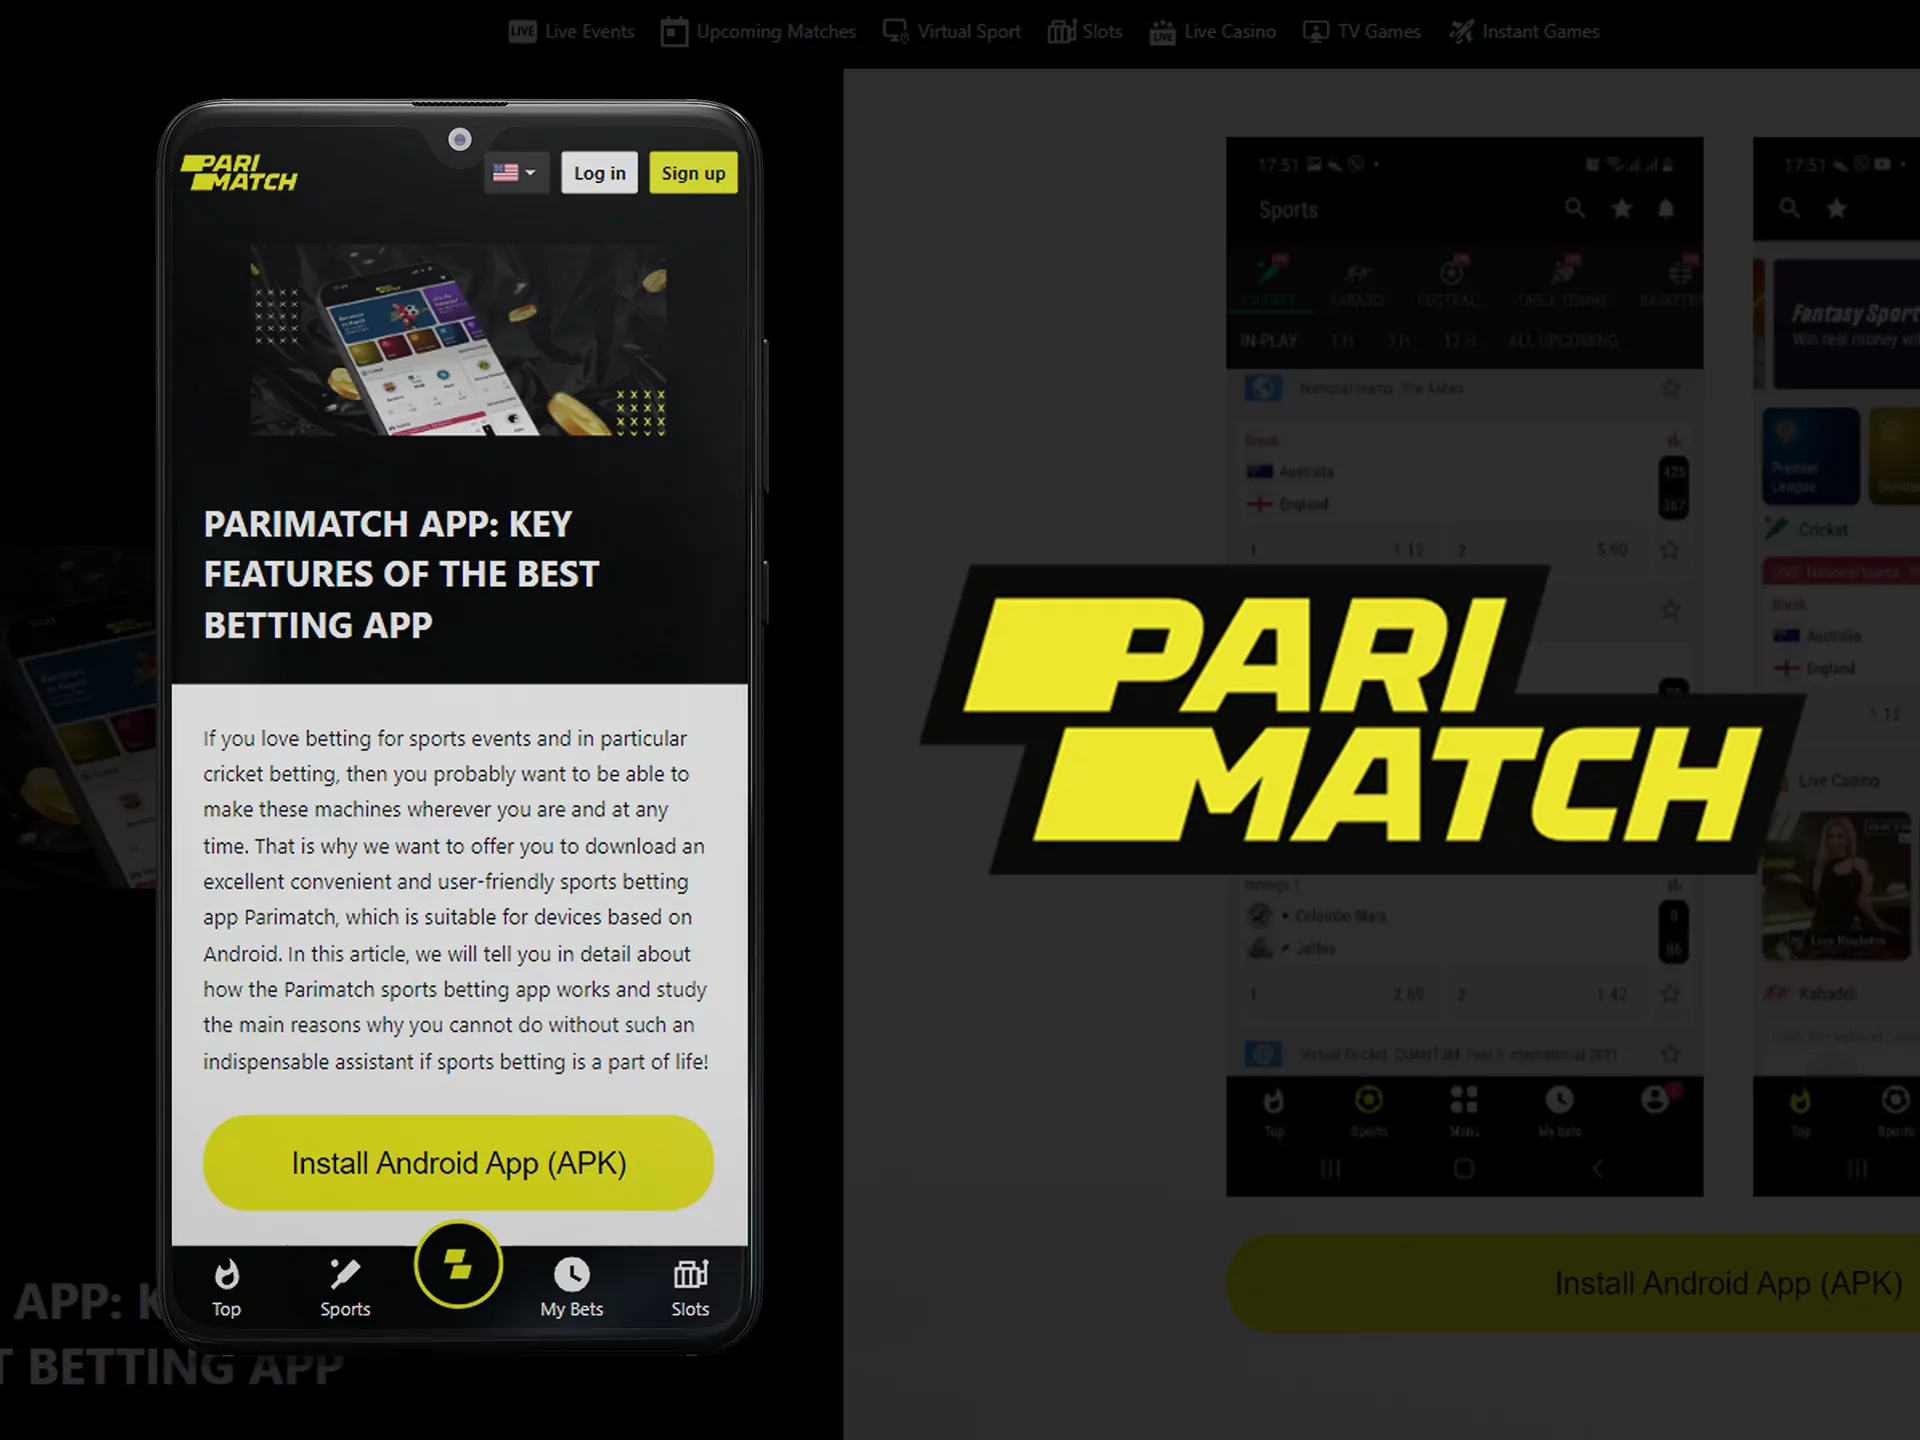 Bet from your Android device at Parimatch.